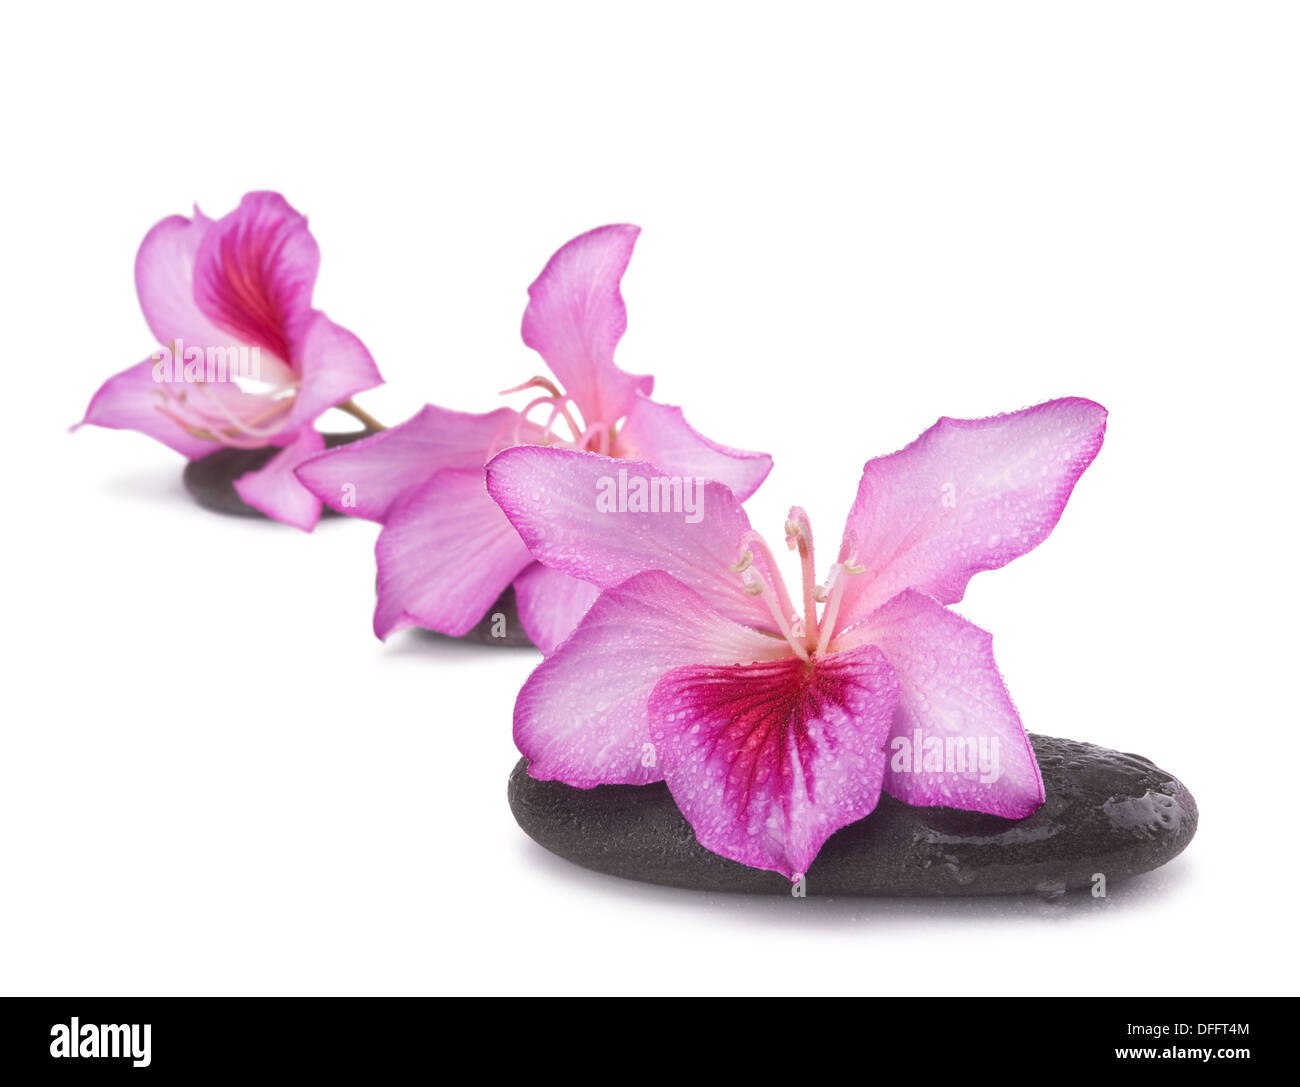 zen stones with pink flowers isolated on white background.Shallow DOF Stock Photo